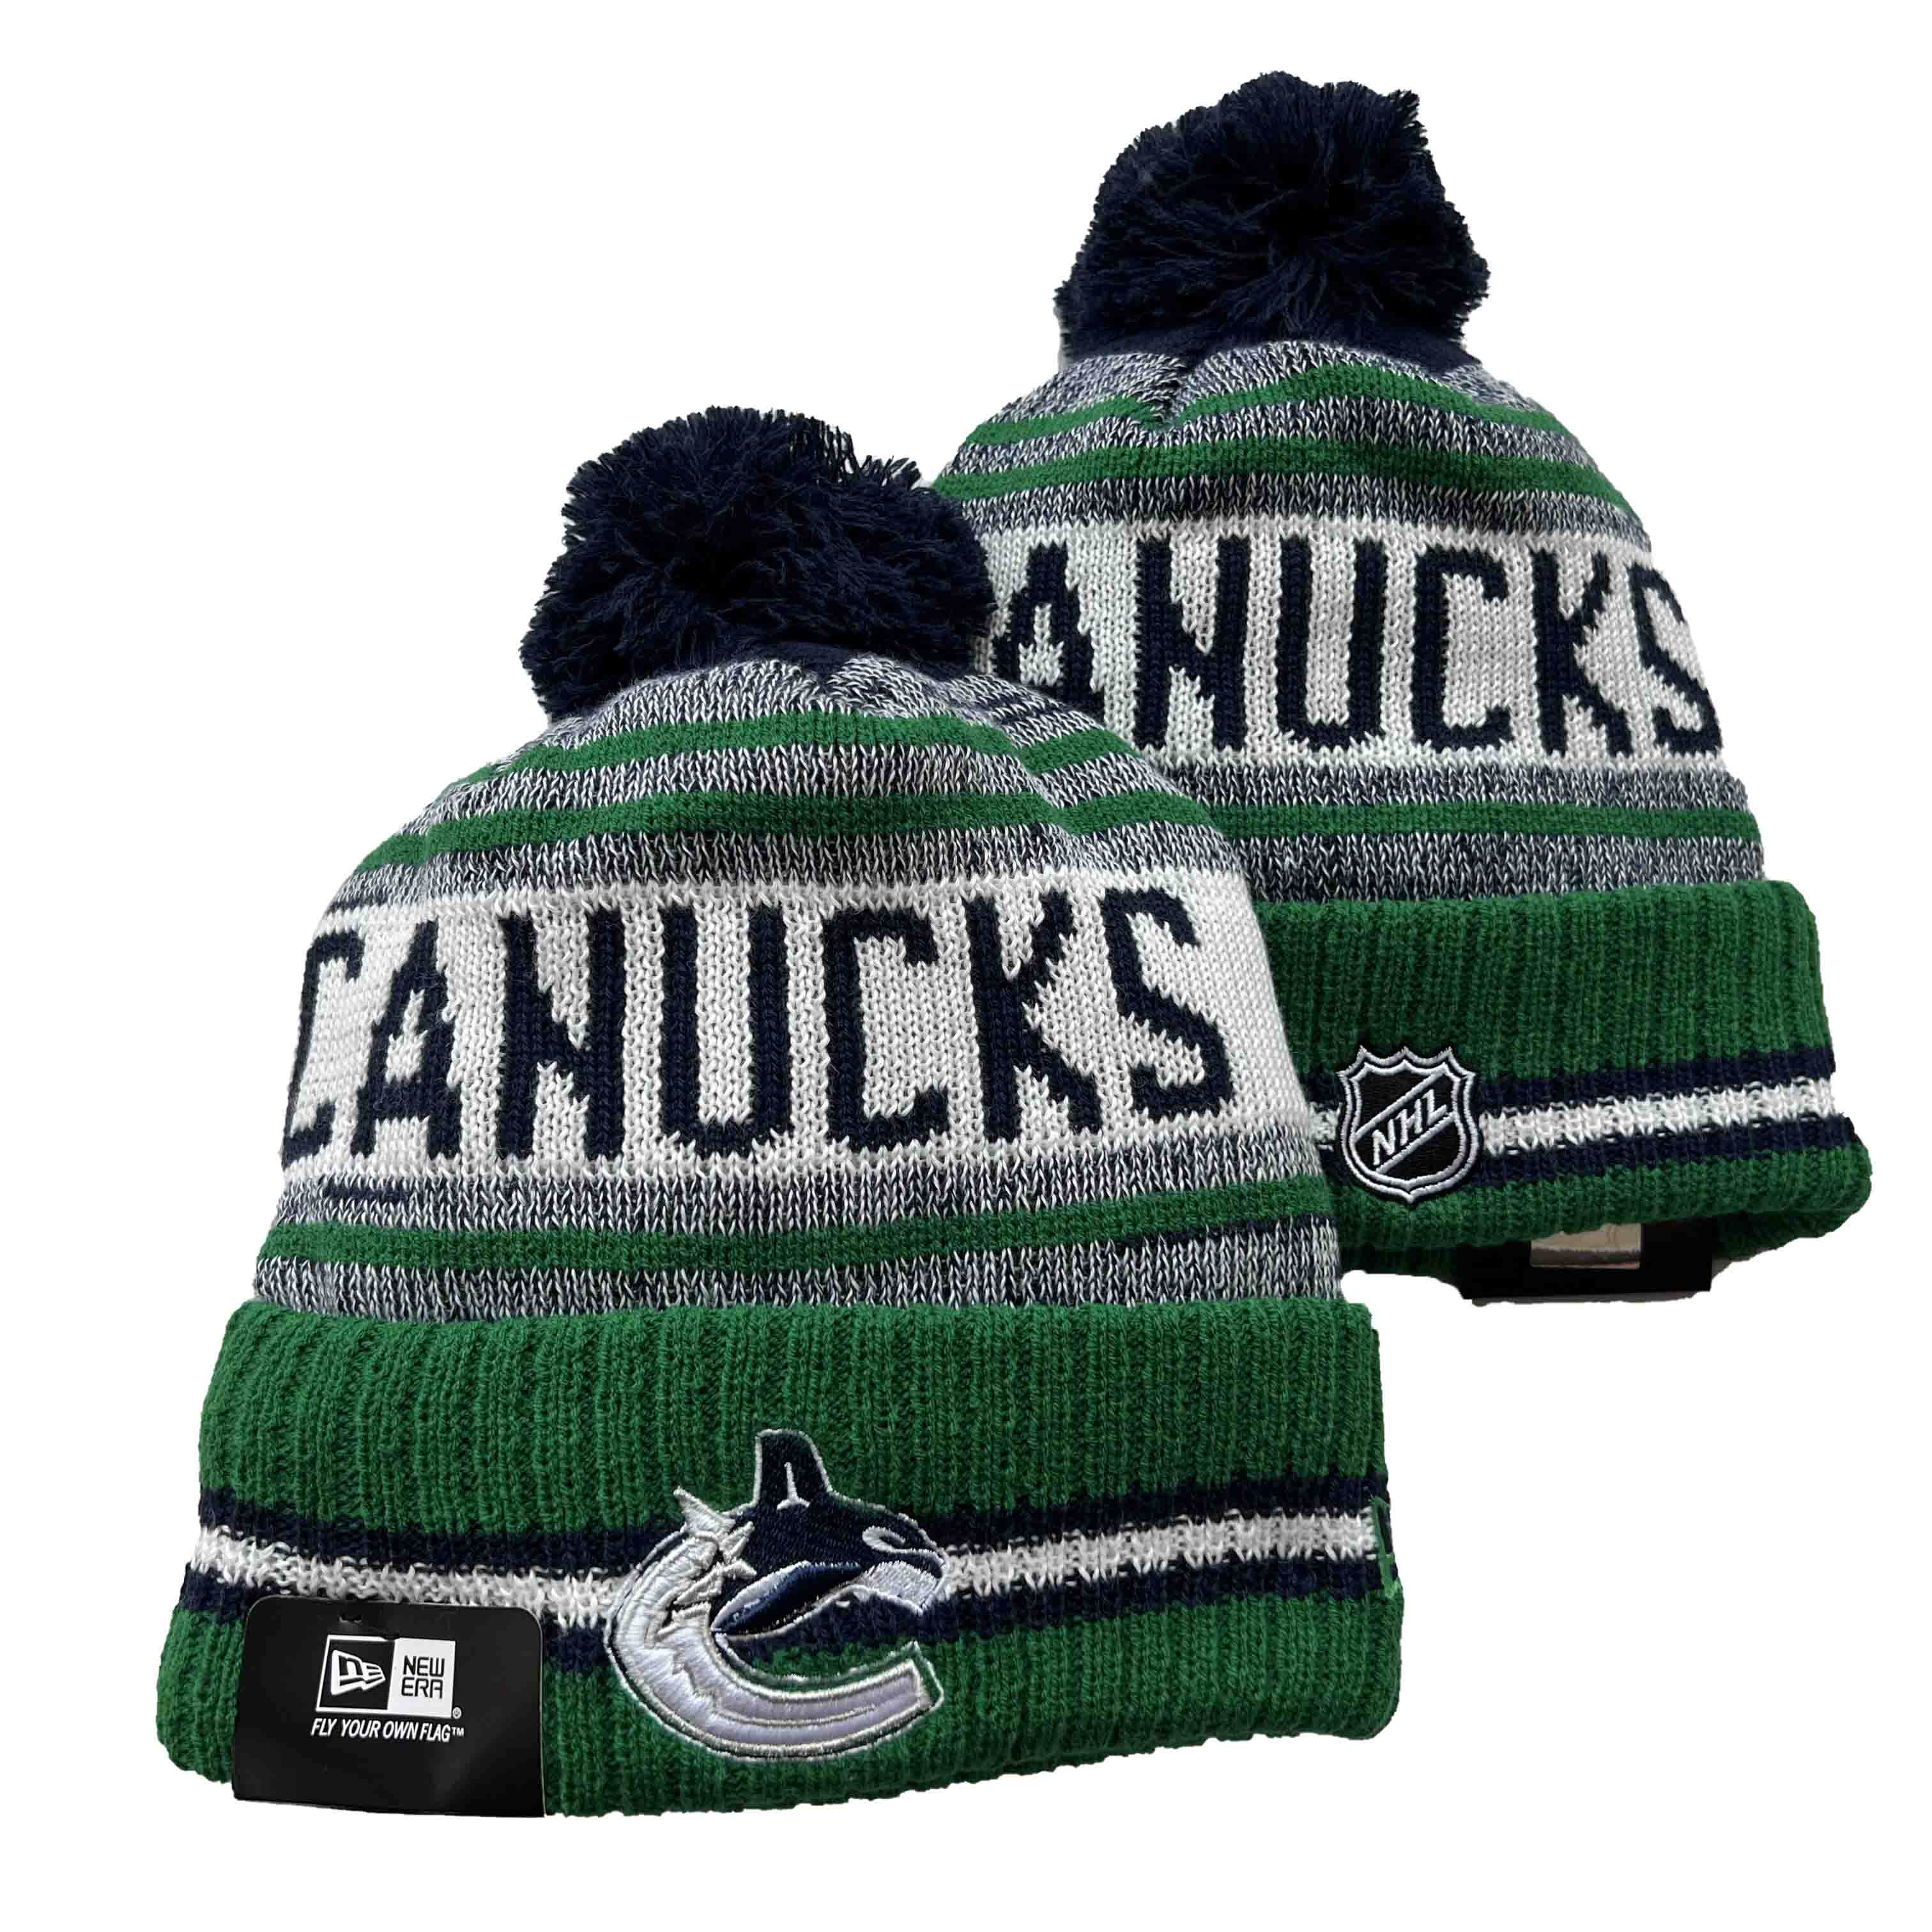 NHL Vancouver Canucks Beanies Knit Hats-YD1612